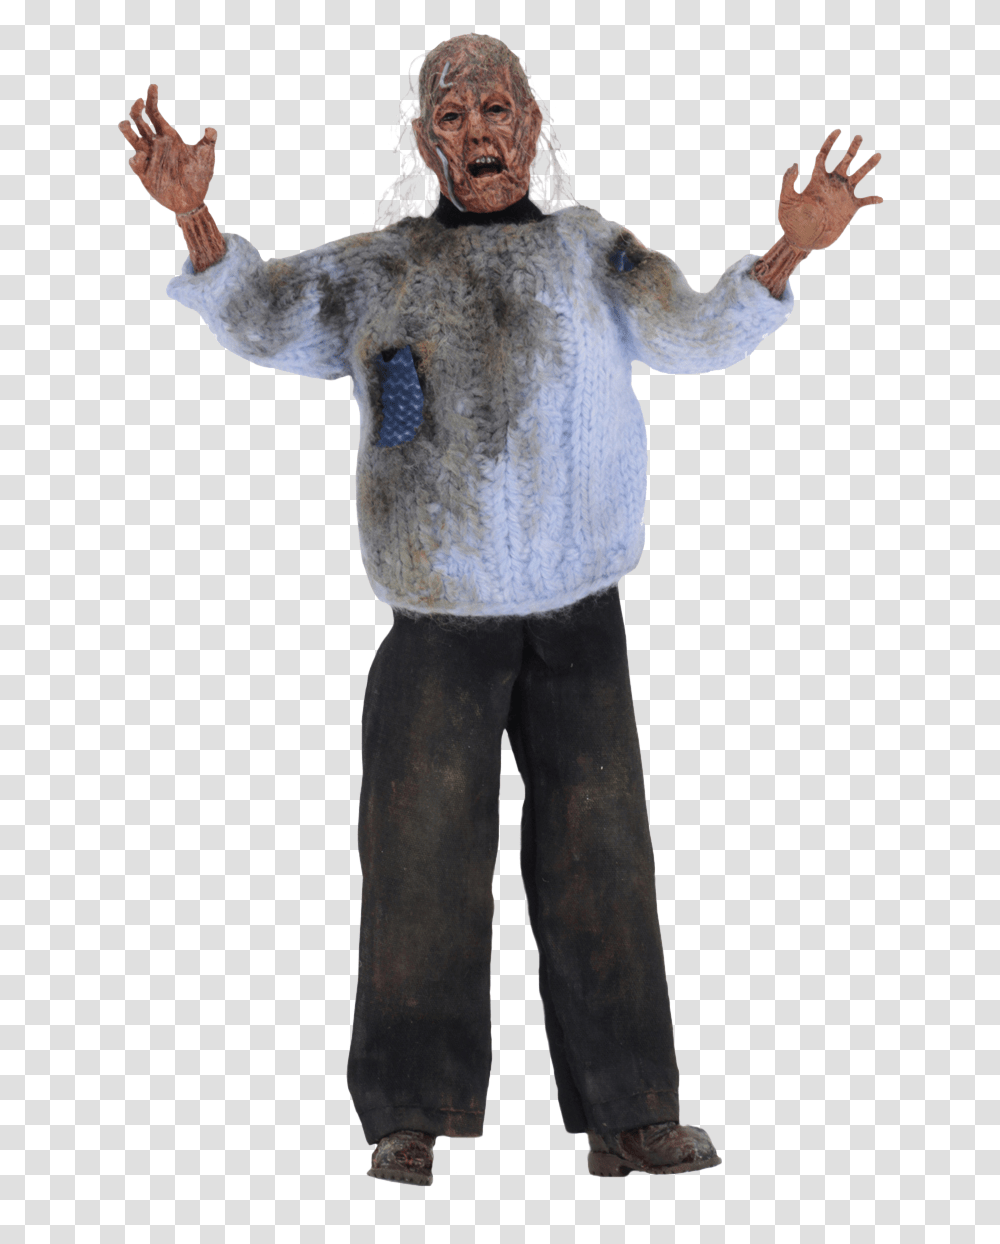 Friday The 13th Part Iii, Person, Human, Mascot, Figurine Transparent Png